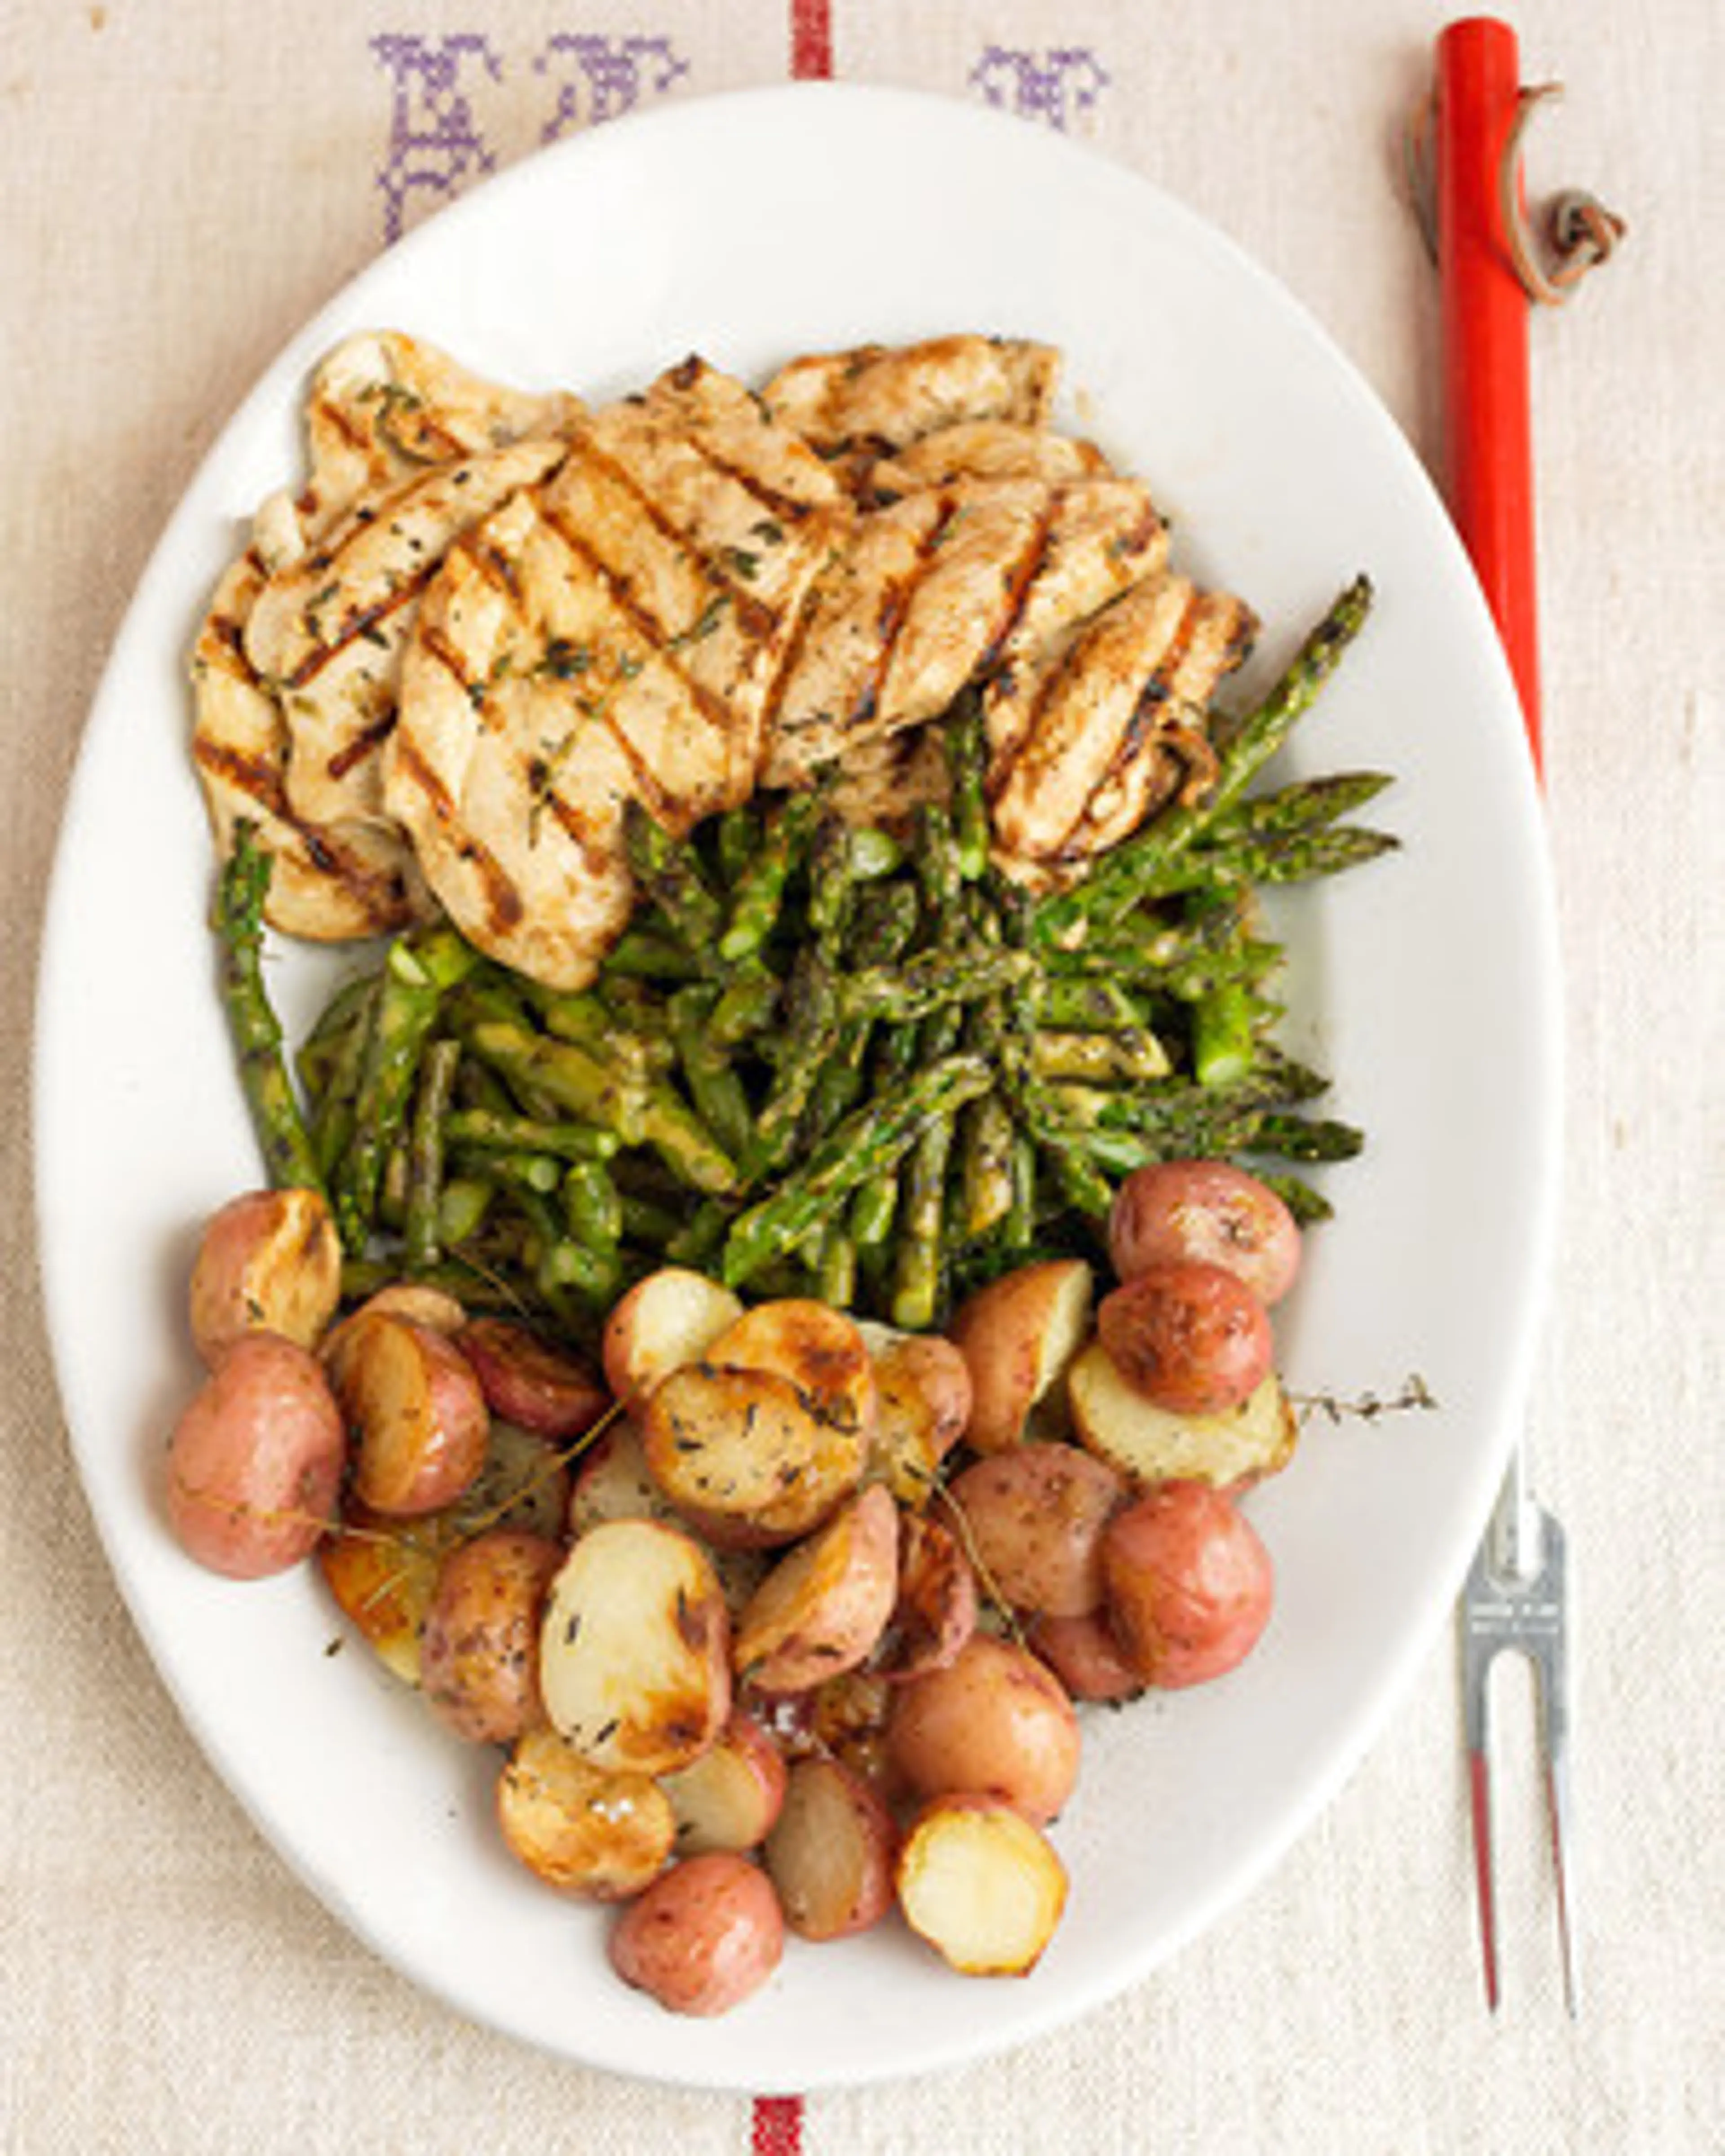 Garlic-Marinated Chicken Cutlets with Grilled Potatoes